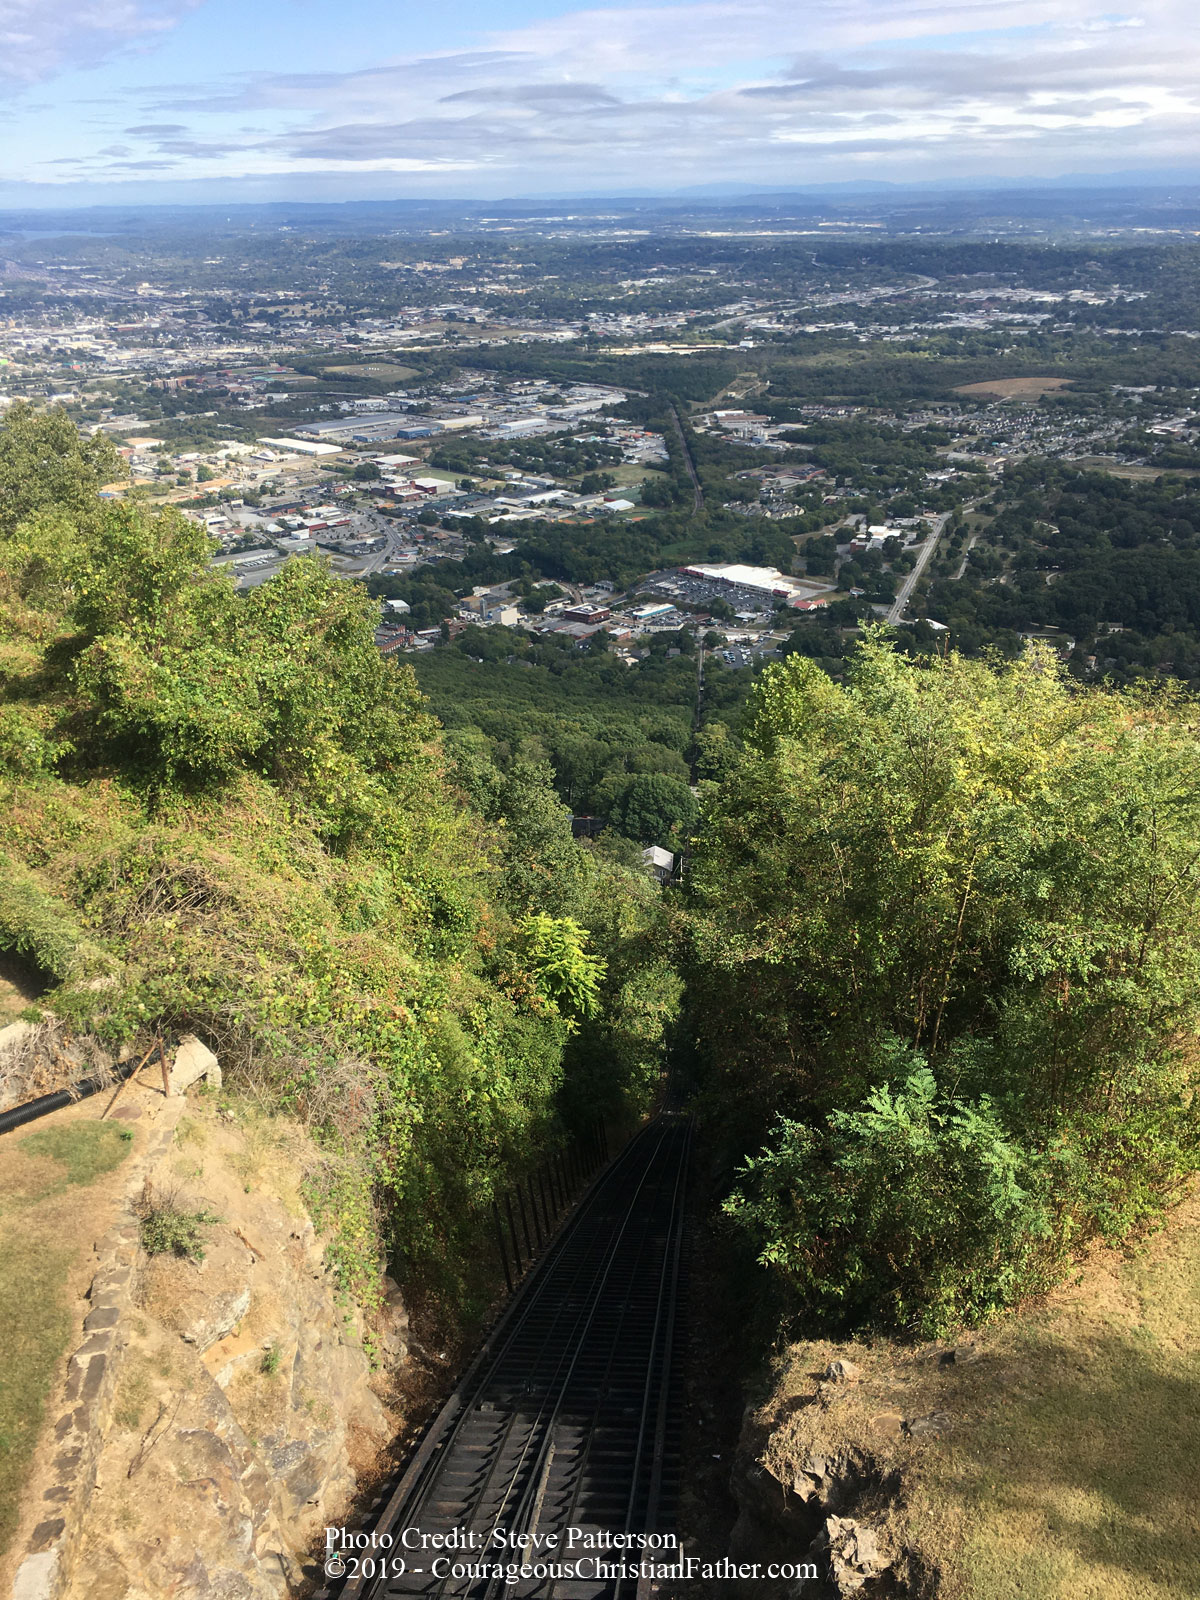 Lookout Mountain Incline Railway in Chattanooga, TN to go up and/or down the mountain to Lookout Mountain. Enjoy a ride on an angled rail car that will take you up or down Lookout Mountain. #InclineRailway #LookoutMountain